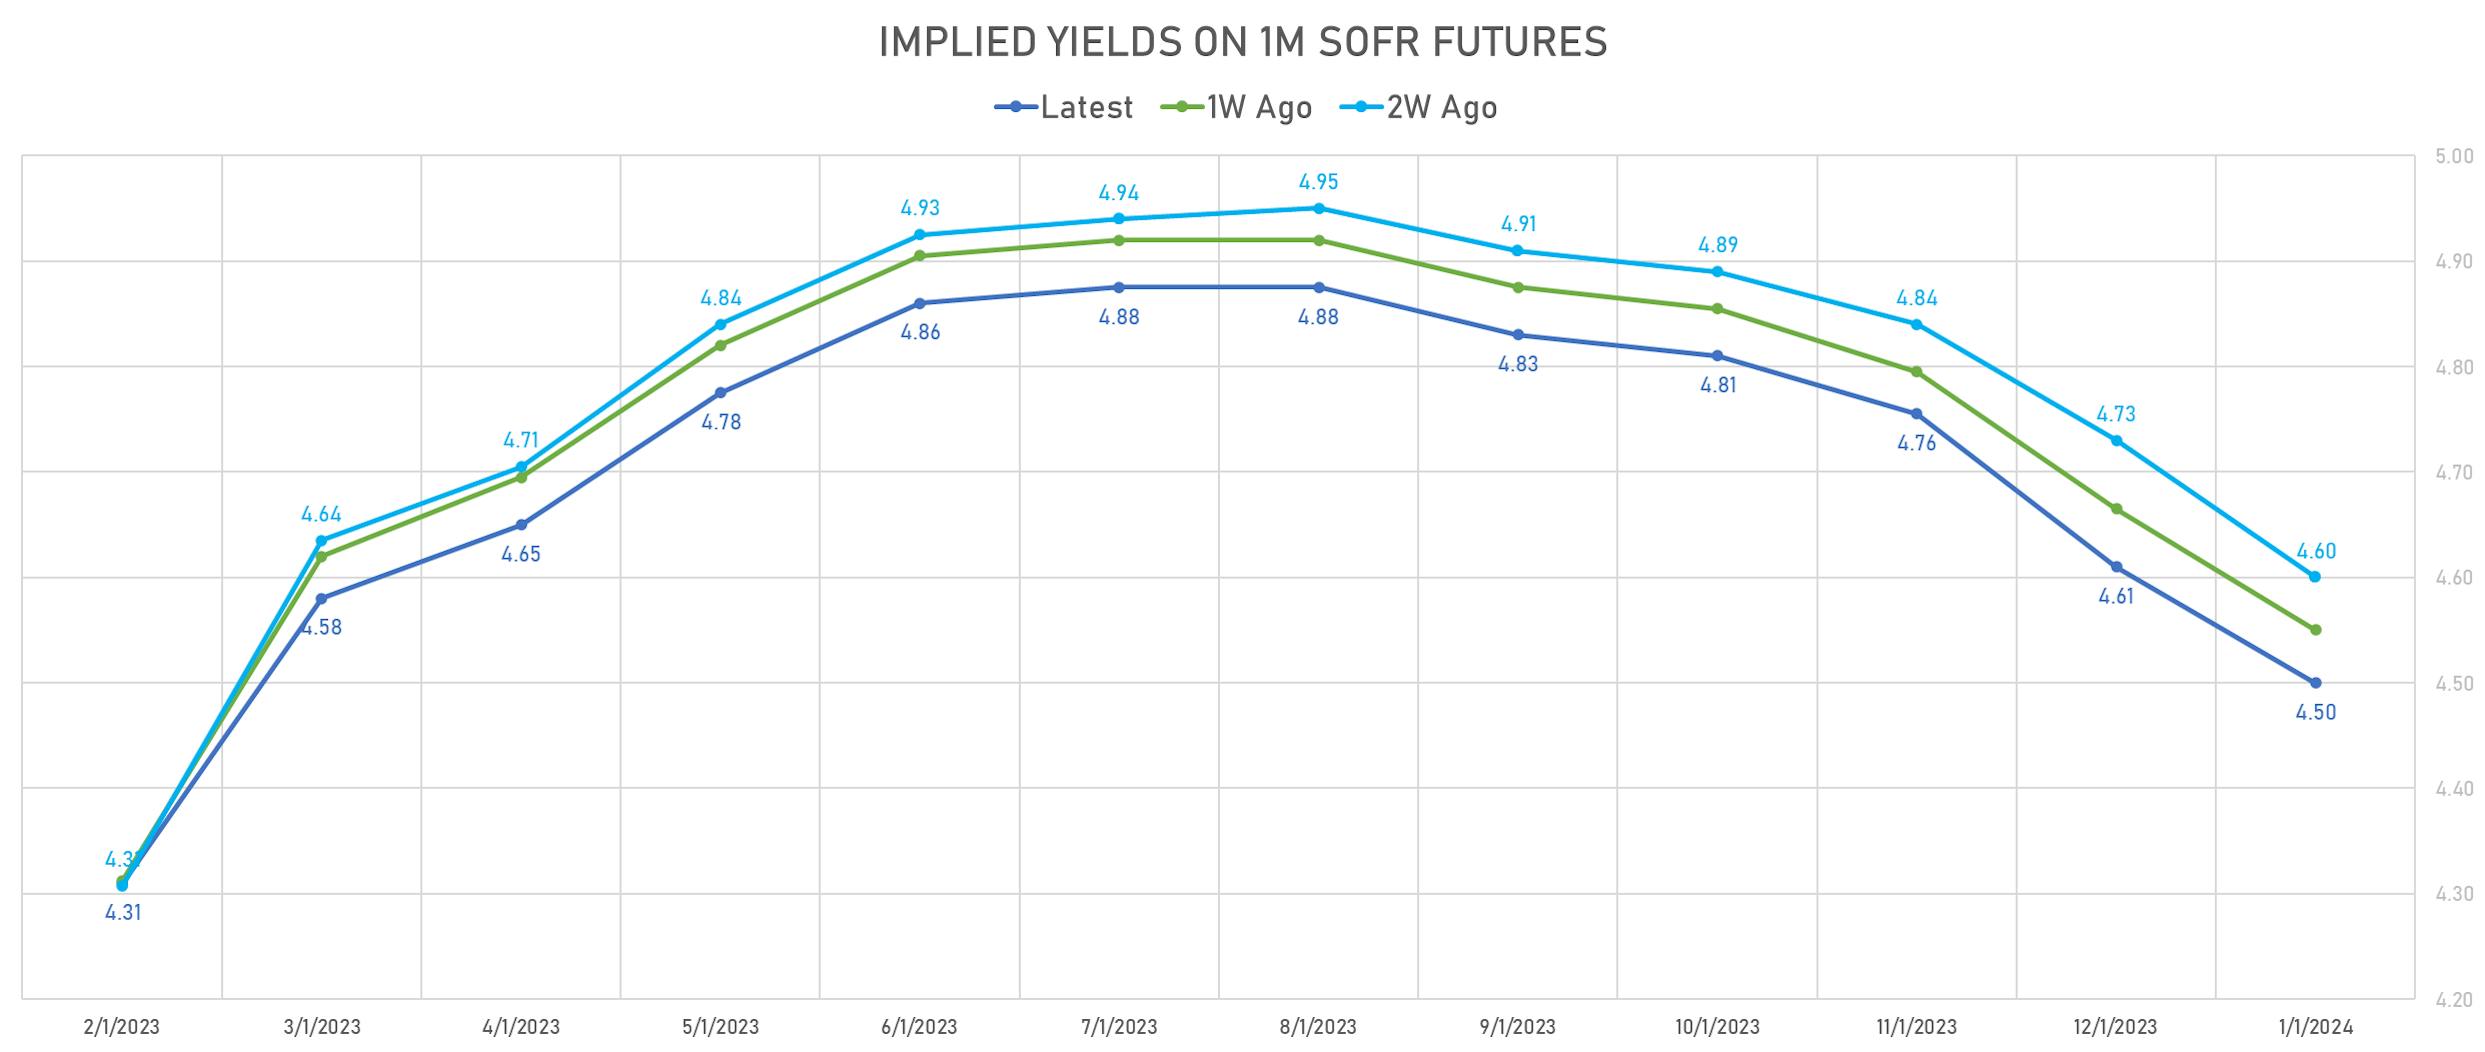 Implied yields on 1M SOFR Futures | Sources: phipost.com, Refinitiv data